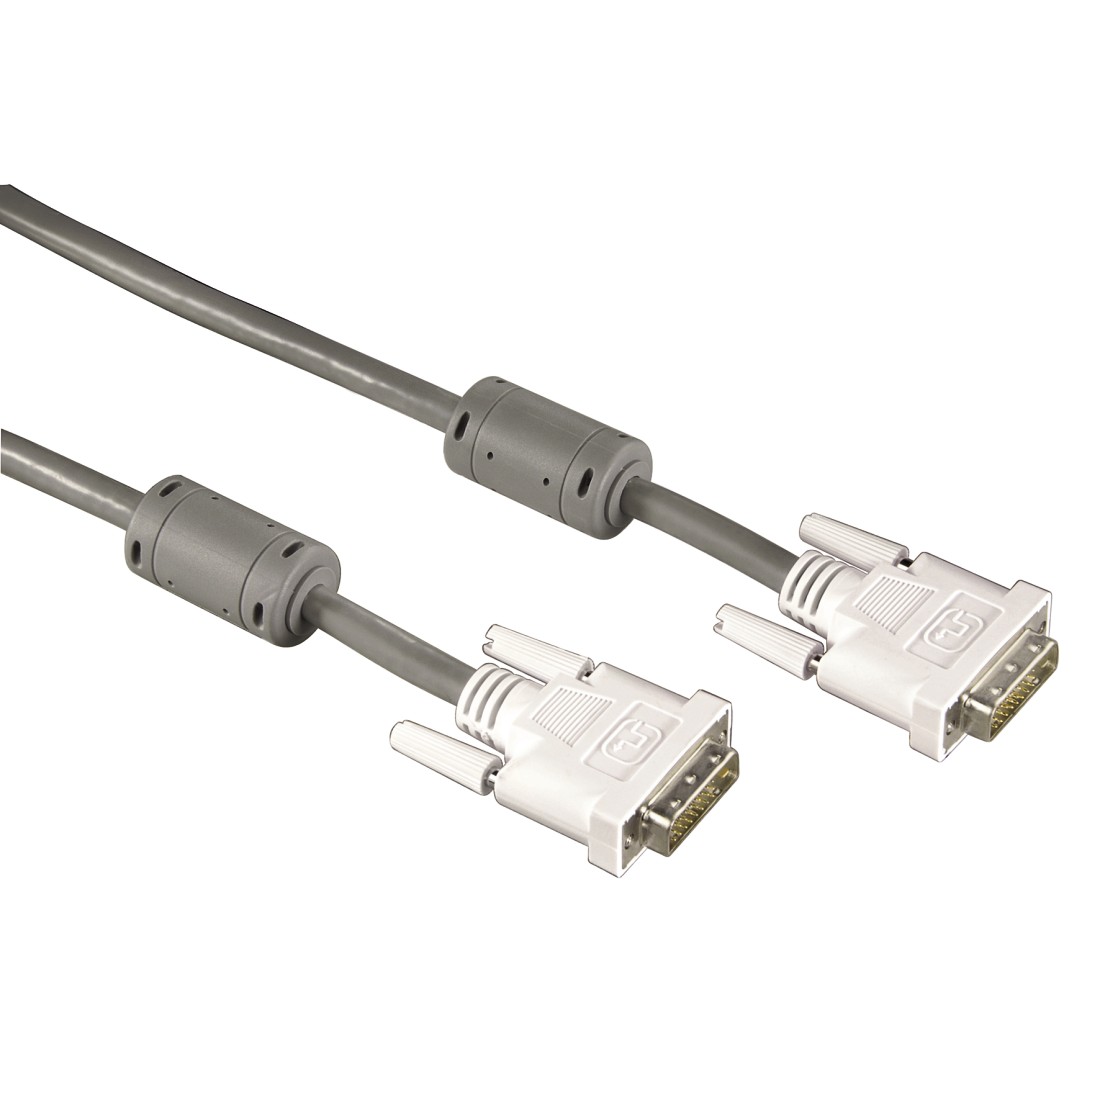 kenable DVI-D Dual Link with Ferrite Cores Male to Male Cable Gold 1m